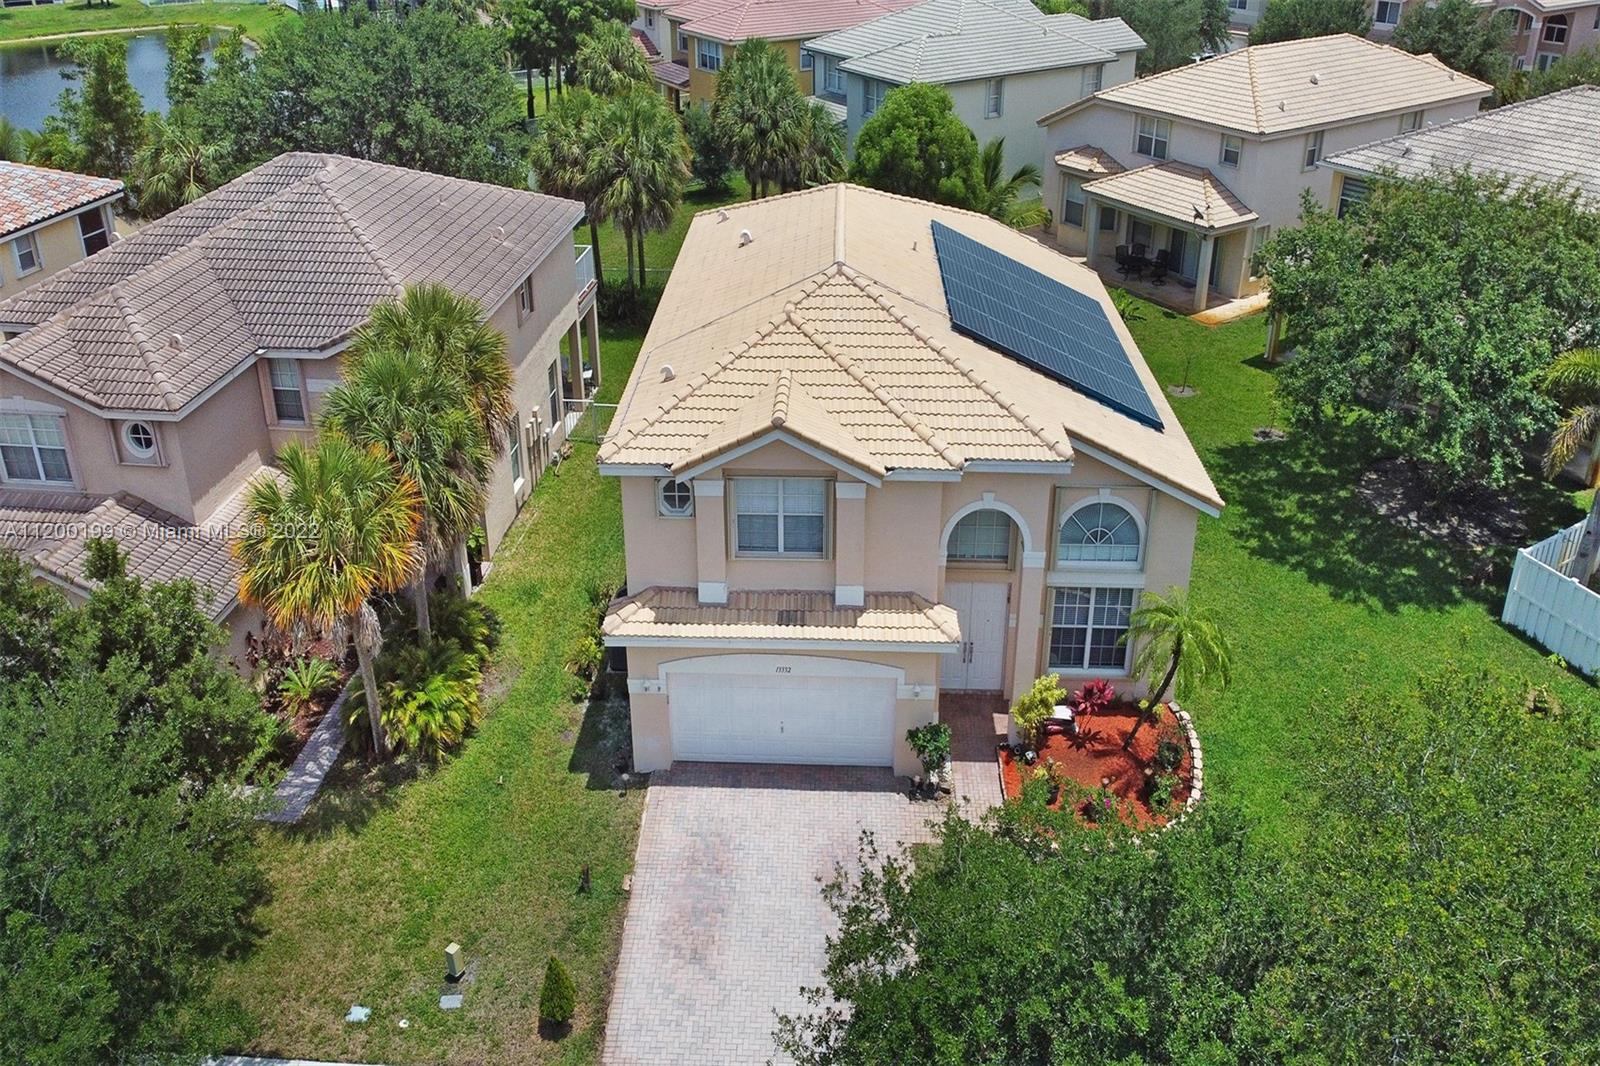 a aerial view of a house with yard and trees in the background